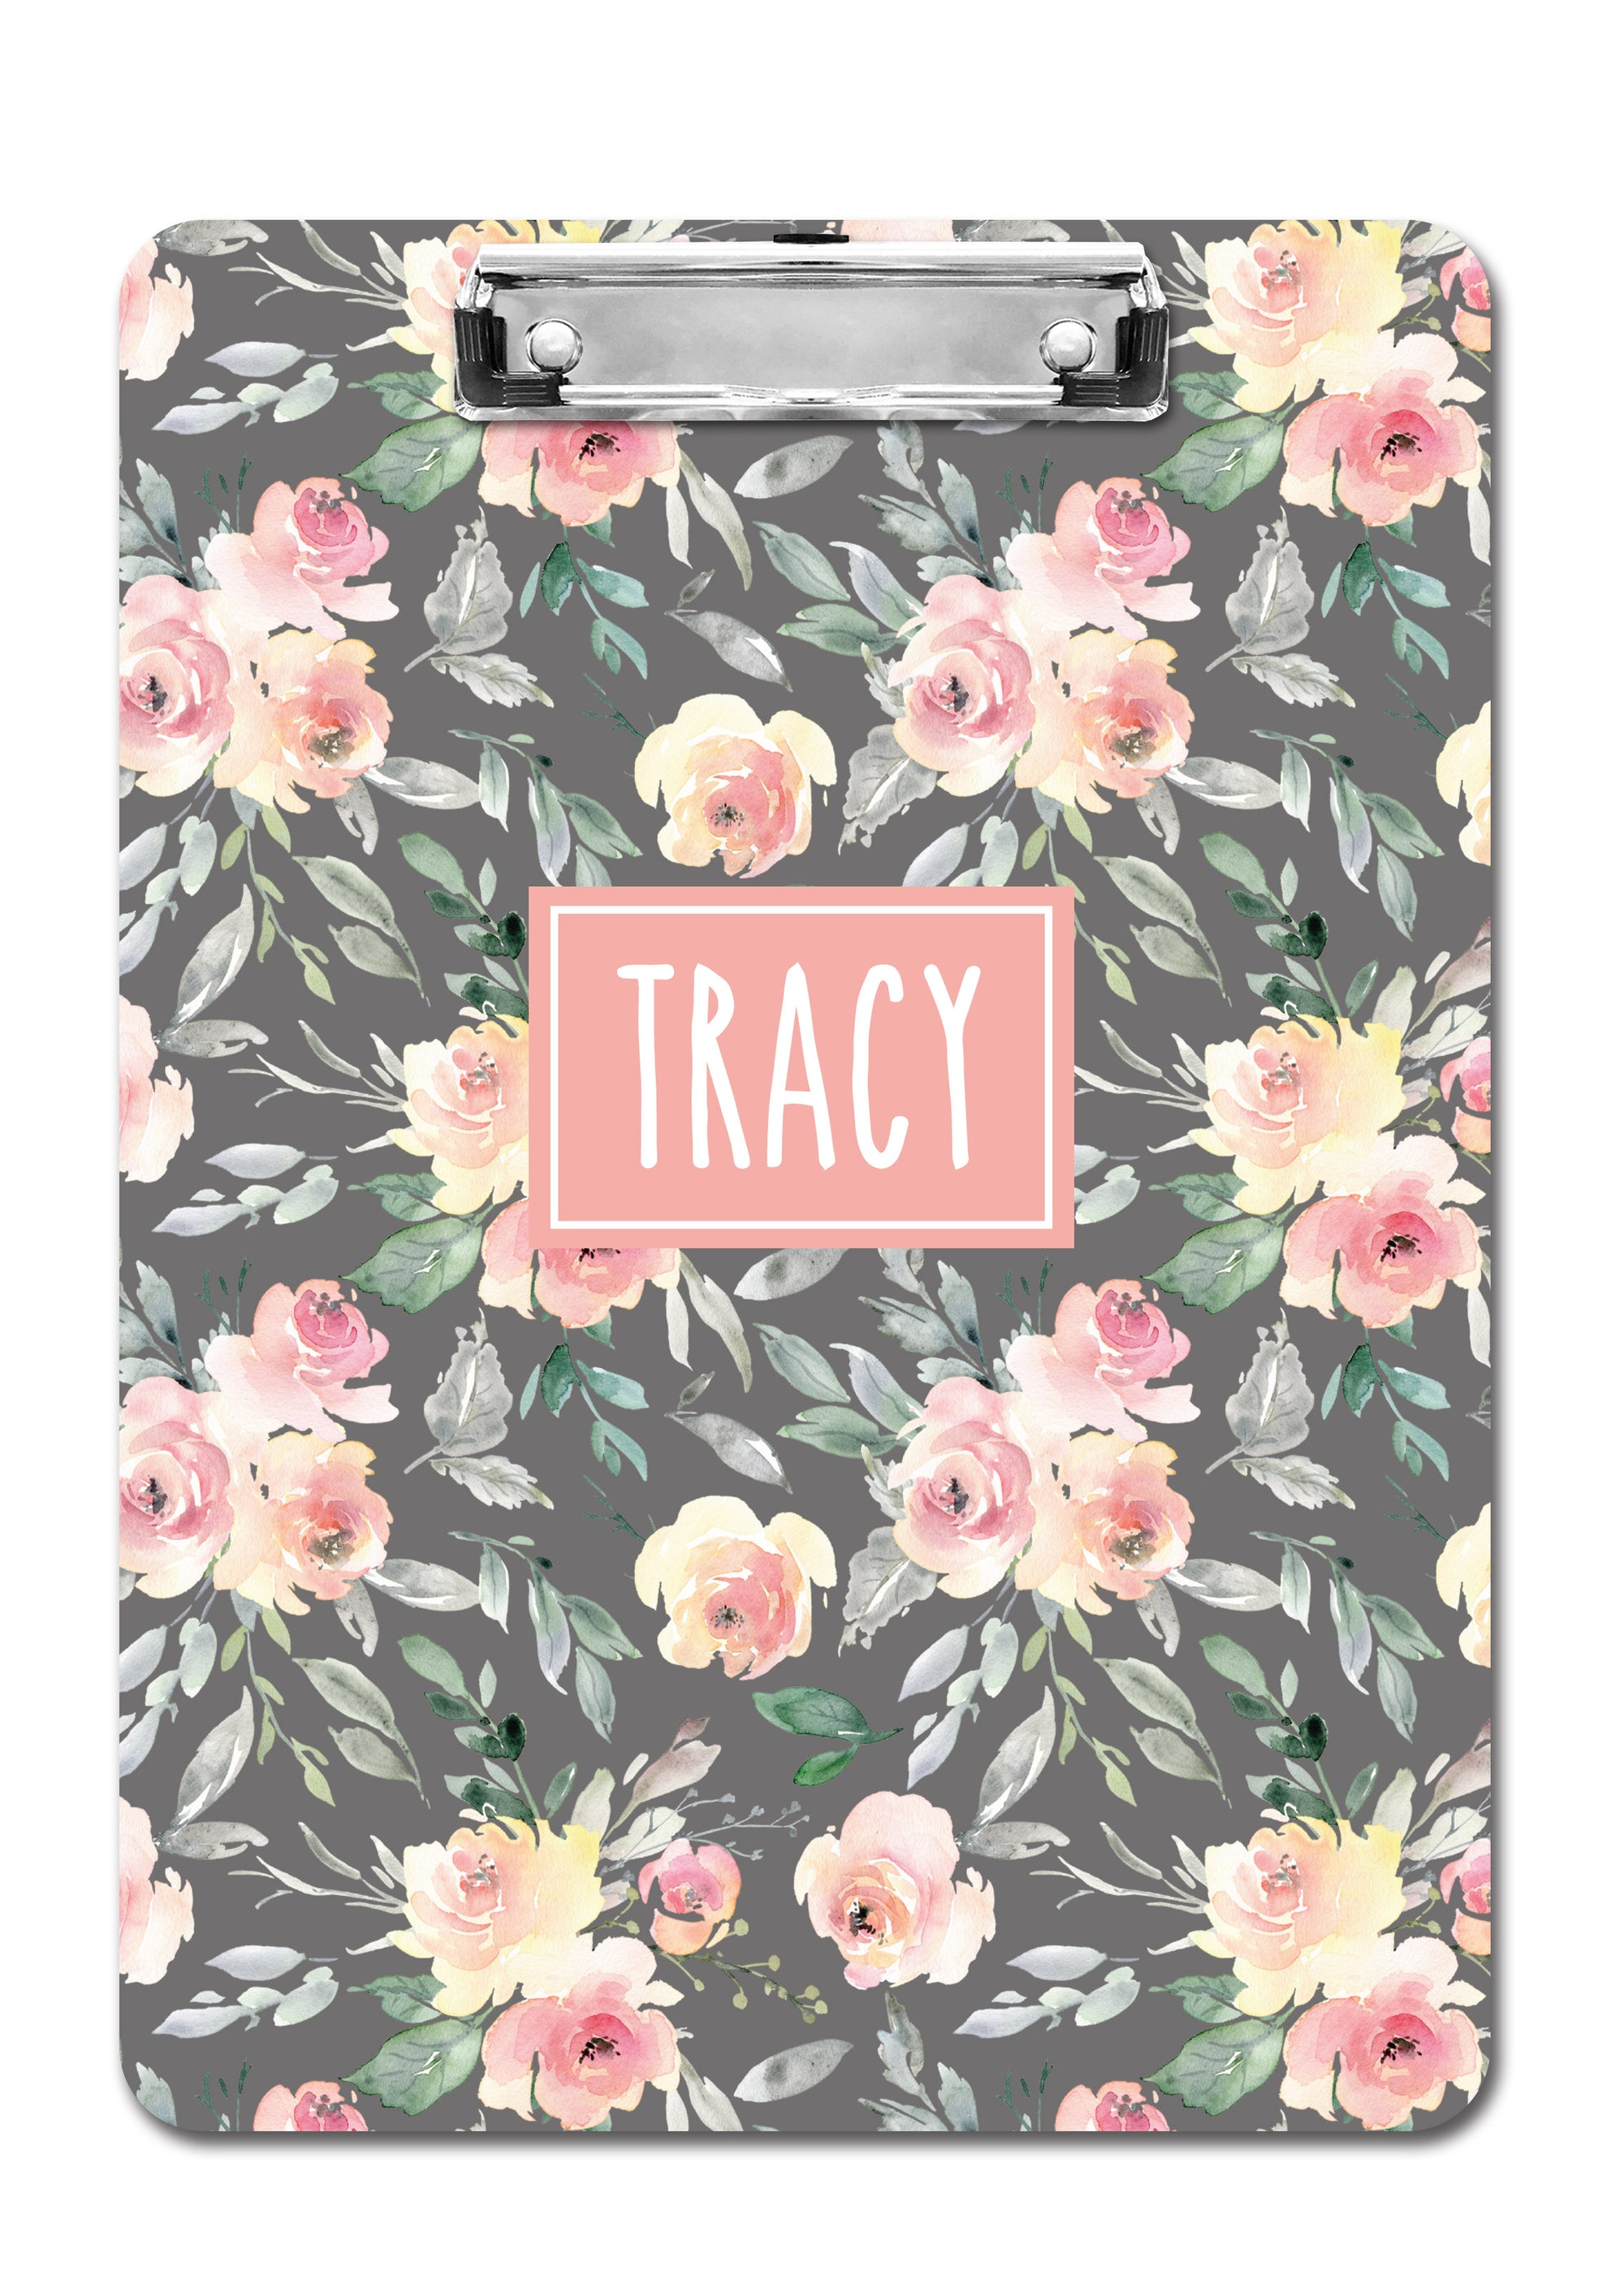 Personalized clipboard, Soft Peach and Gray Floral, PIPSY.COM